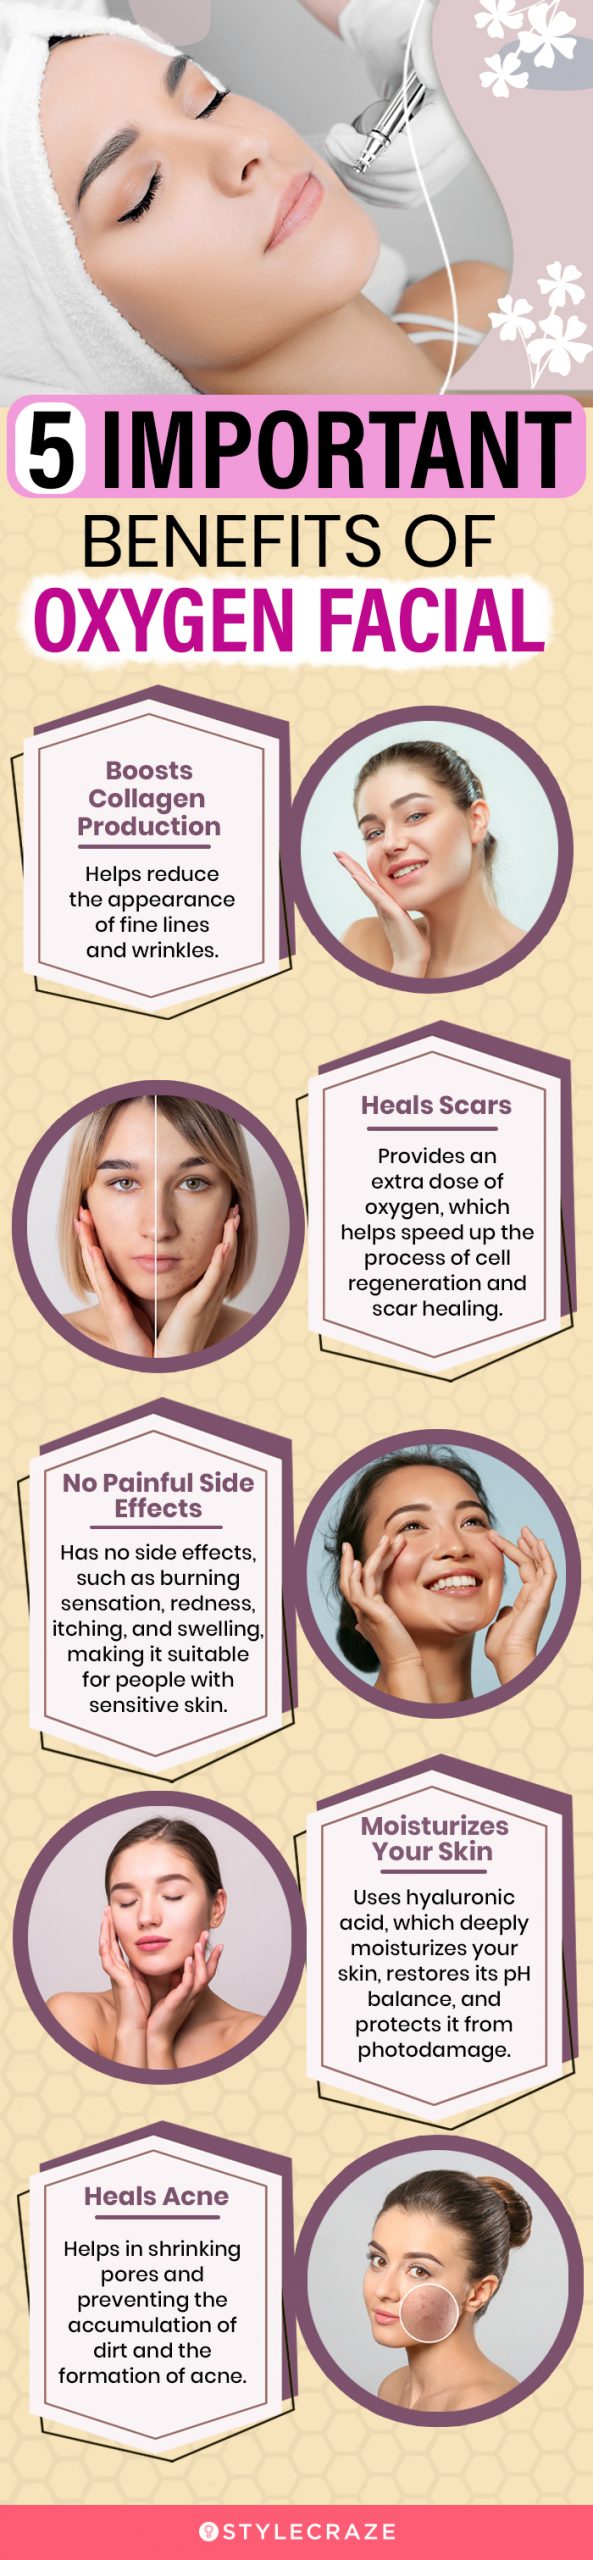 5 important benefits of oxygen facial (infographic)